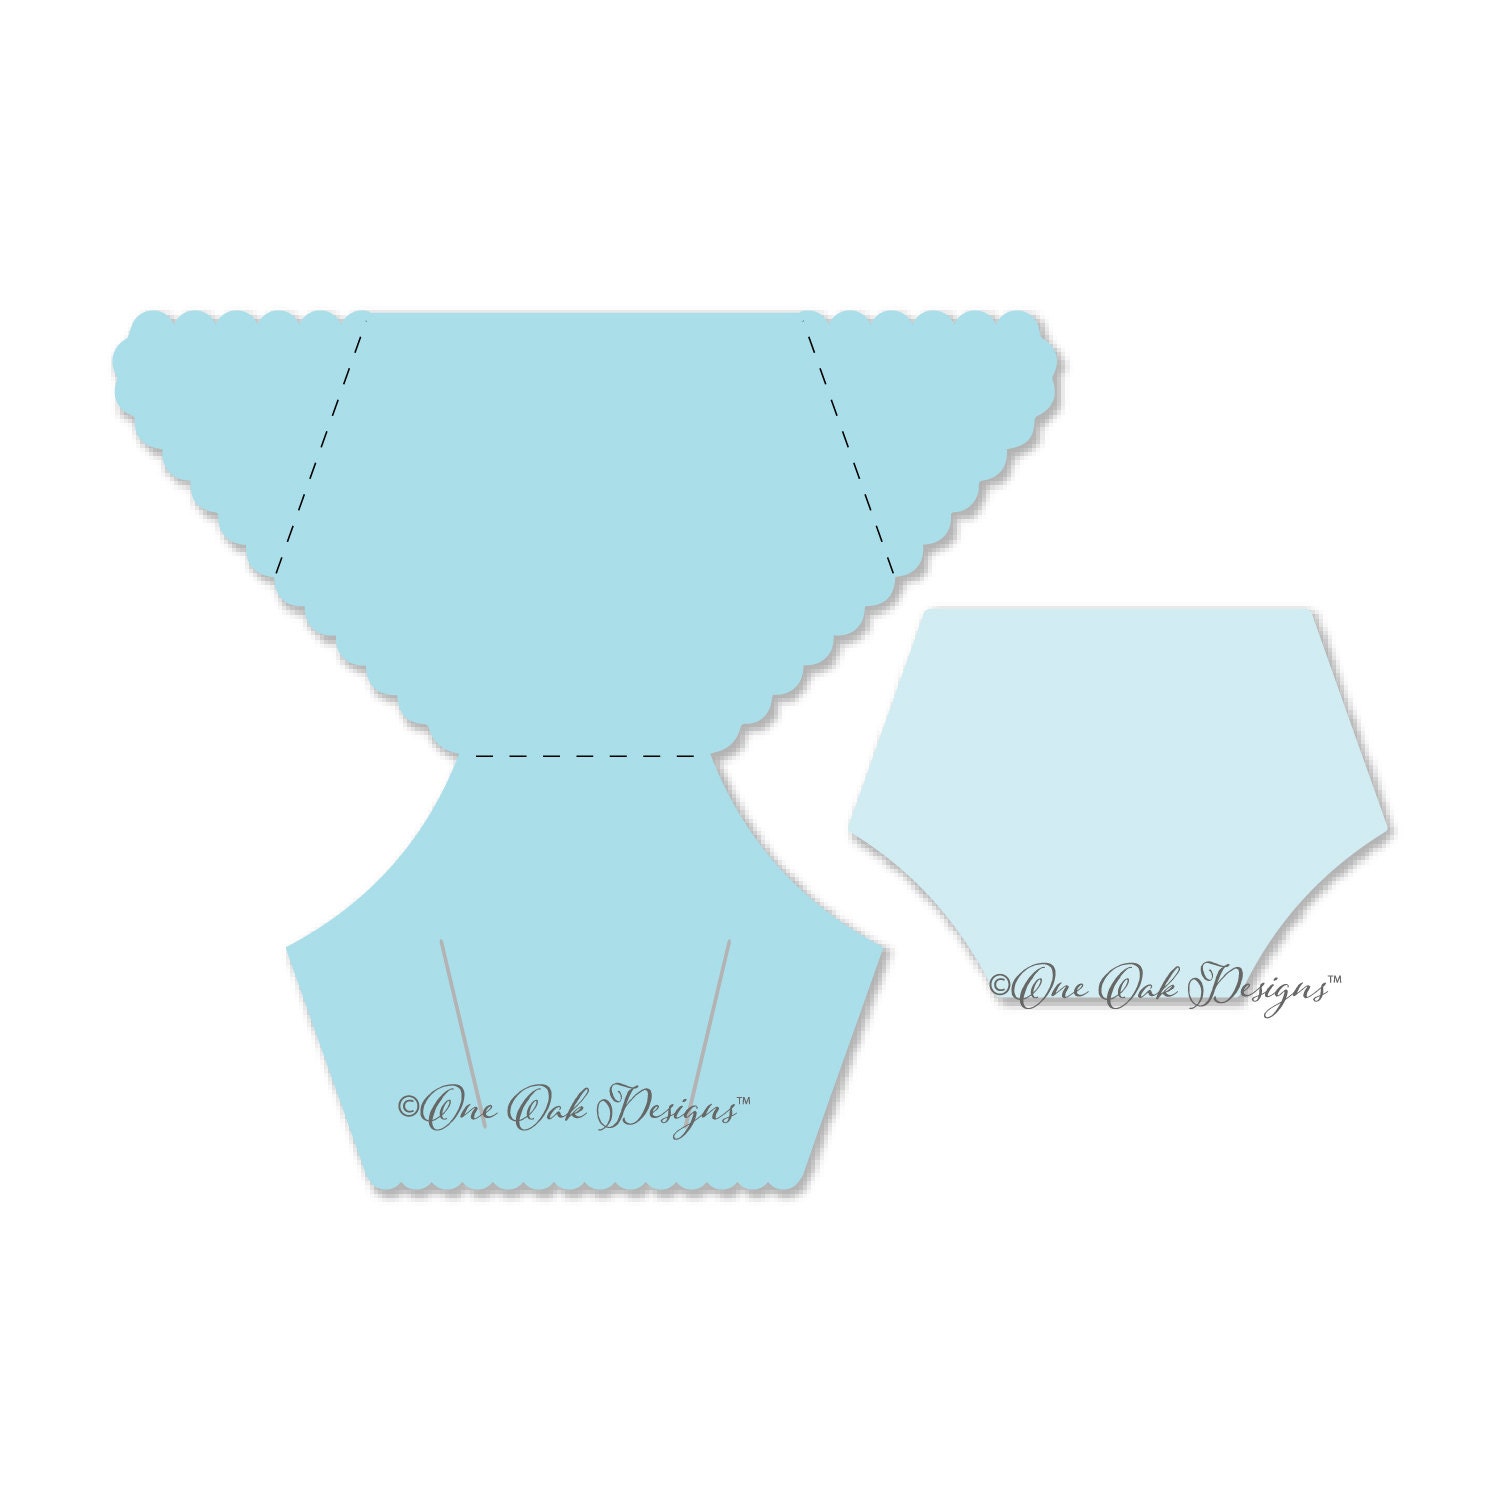 Diaper Card Template SVG File PDF / dxf / jpg / png / eps / ai